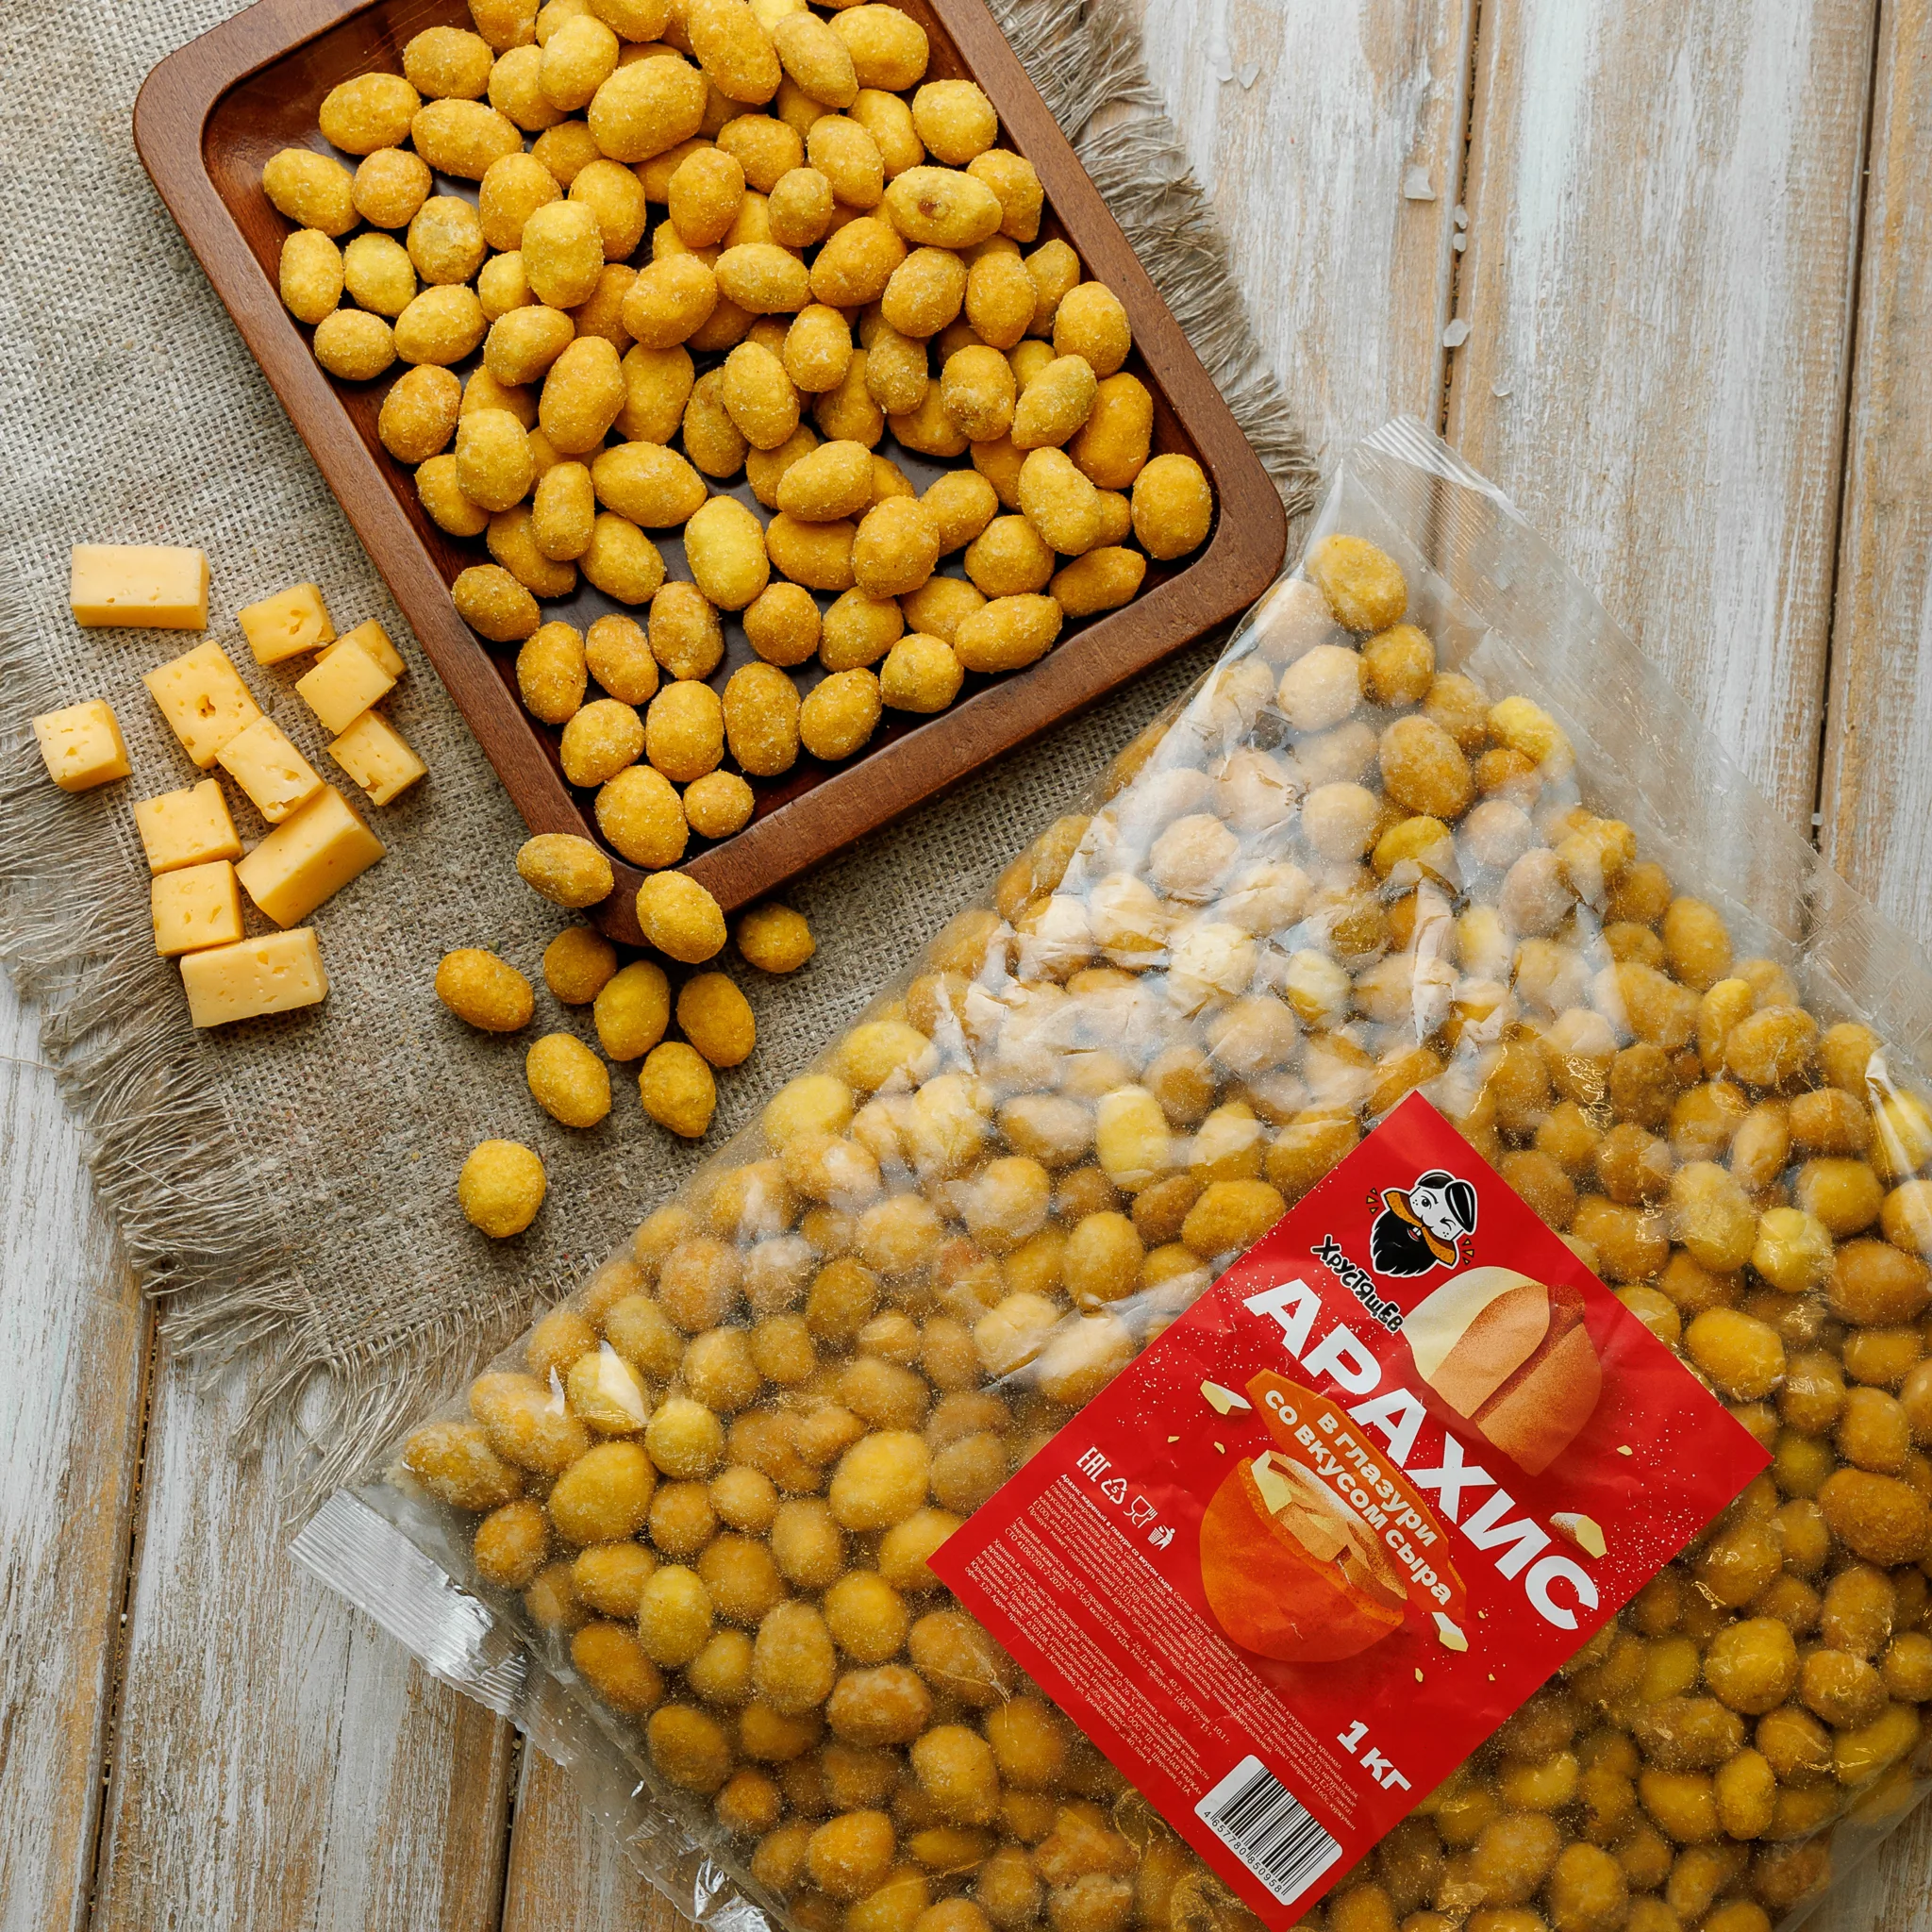 Peanuts in a crispy crust with a cheese flavor package of 1000 g./Snacks